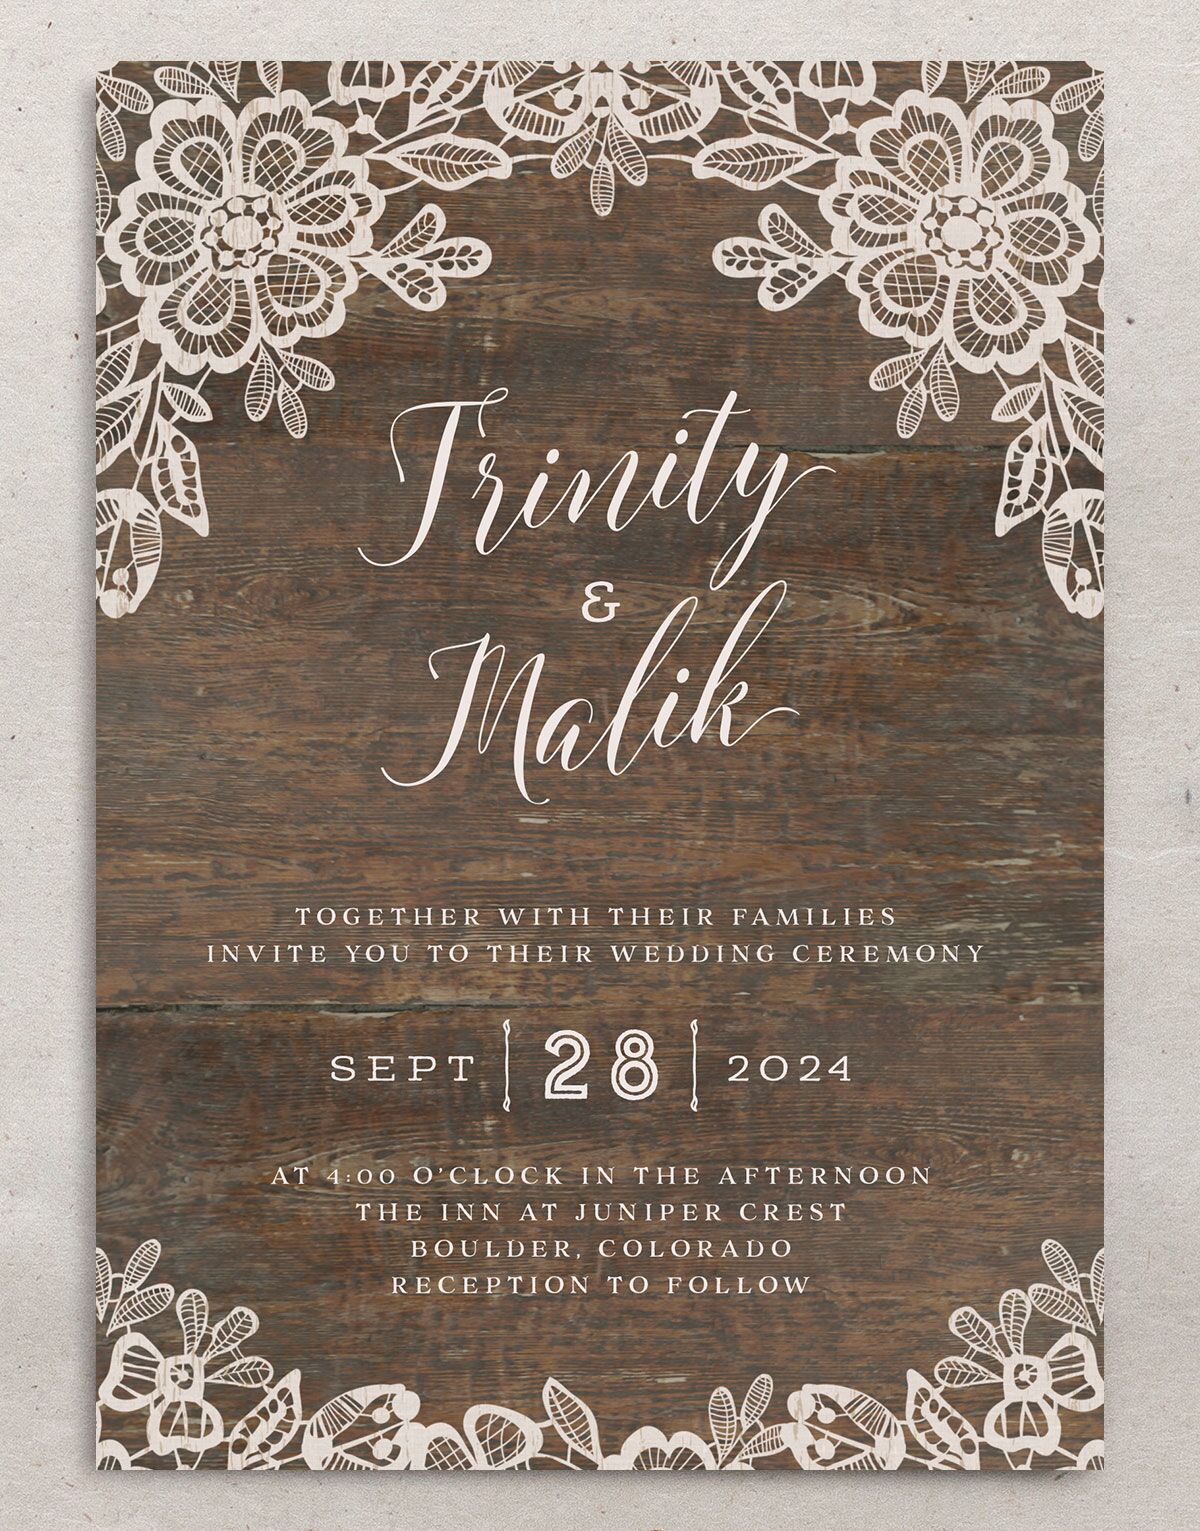 Rustic Lace Wedding Invitations front in Walnut